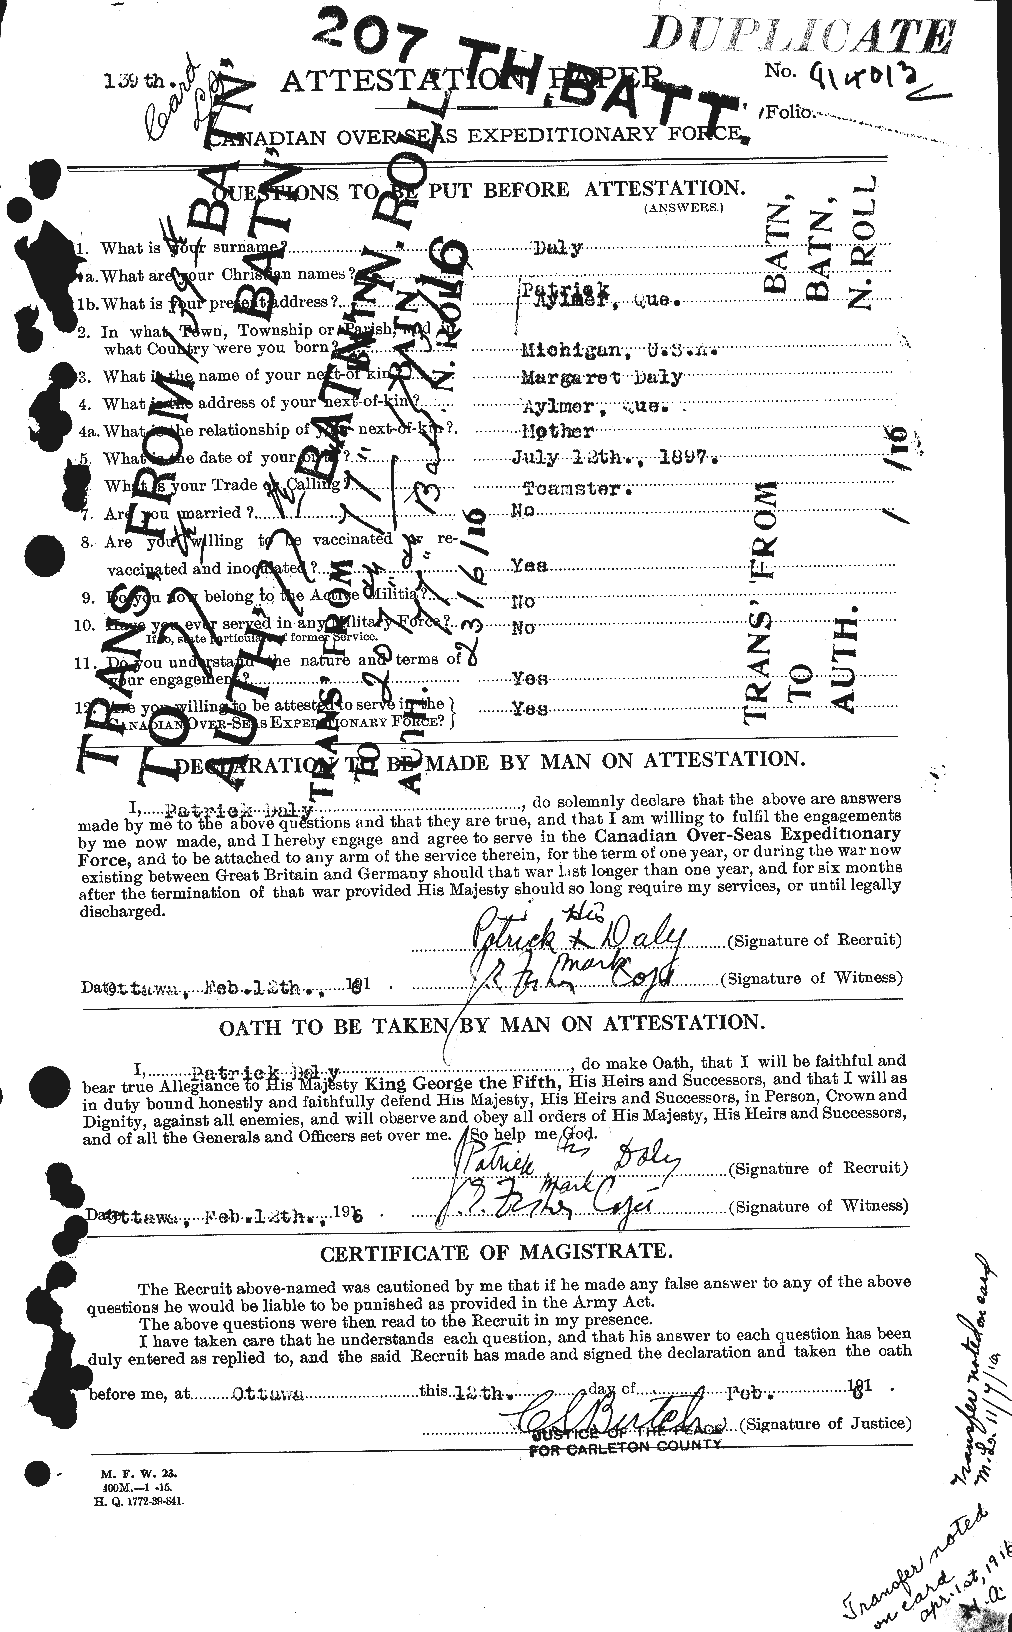 Personnel Records of the First World War - CEF 276388a